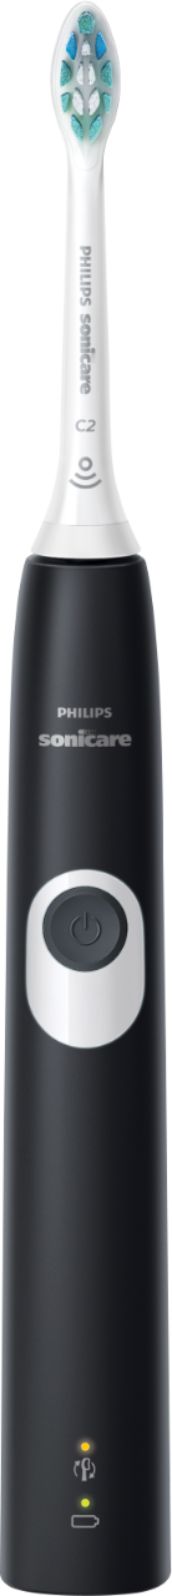 Philips Sonicare - ProtectiveClean 4100 Rechargeable Toothbrush - Black